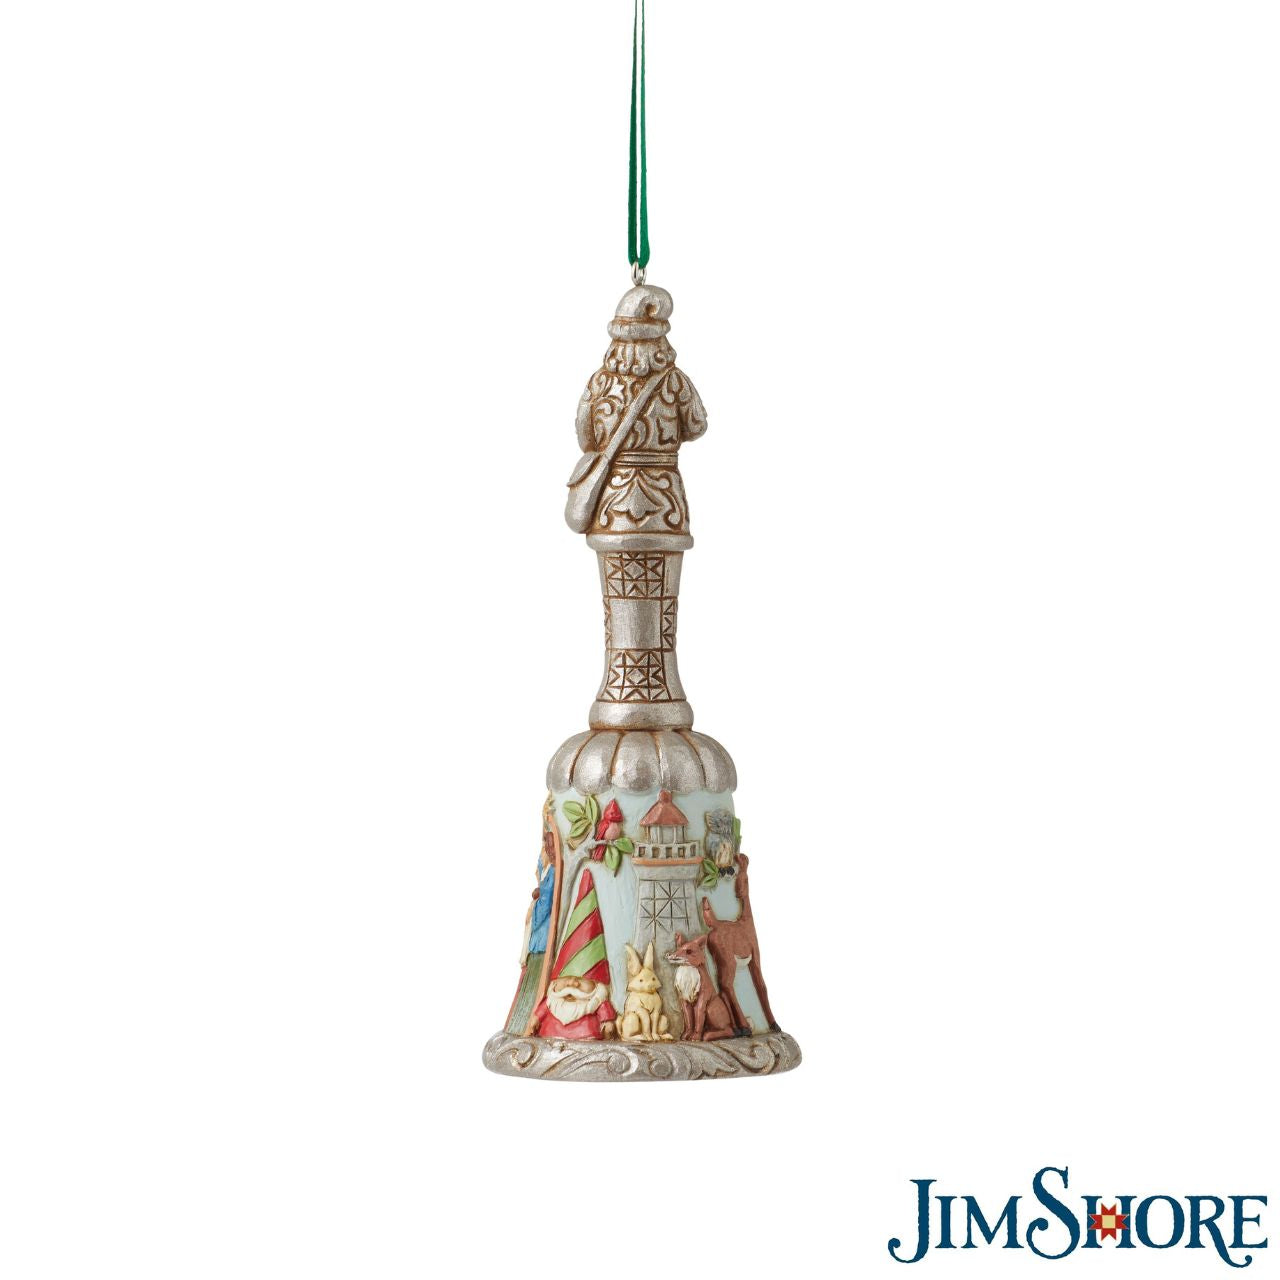 Jim Shore Heartwood Creek 20th Anniversary Bell Ornament  This elegant bell celebrates 20 years of designs with an emerald green crystal in Santa's hand and a platinum painted finish. The hanging bell makes a lovely addition to any Christmas tree and rings in another year of Jim Shore creations.